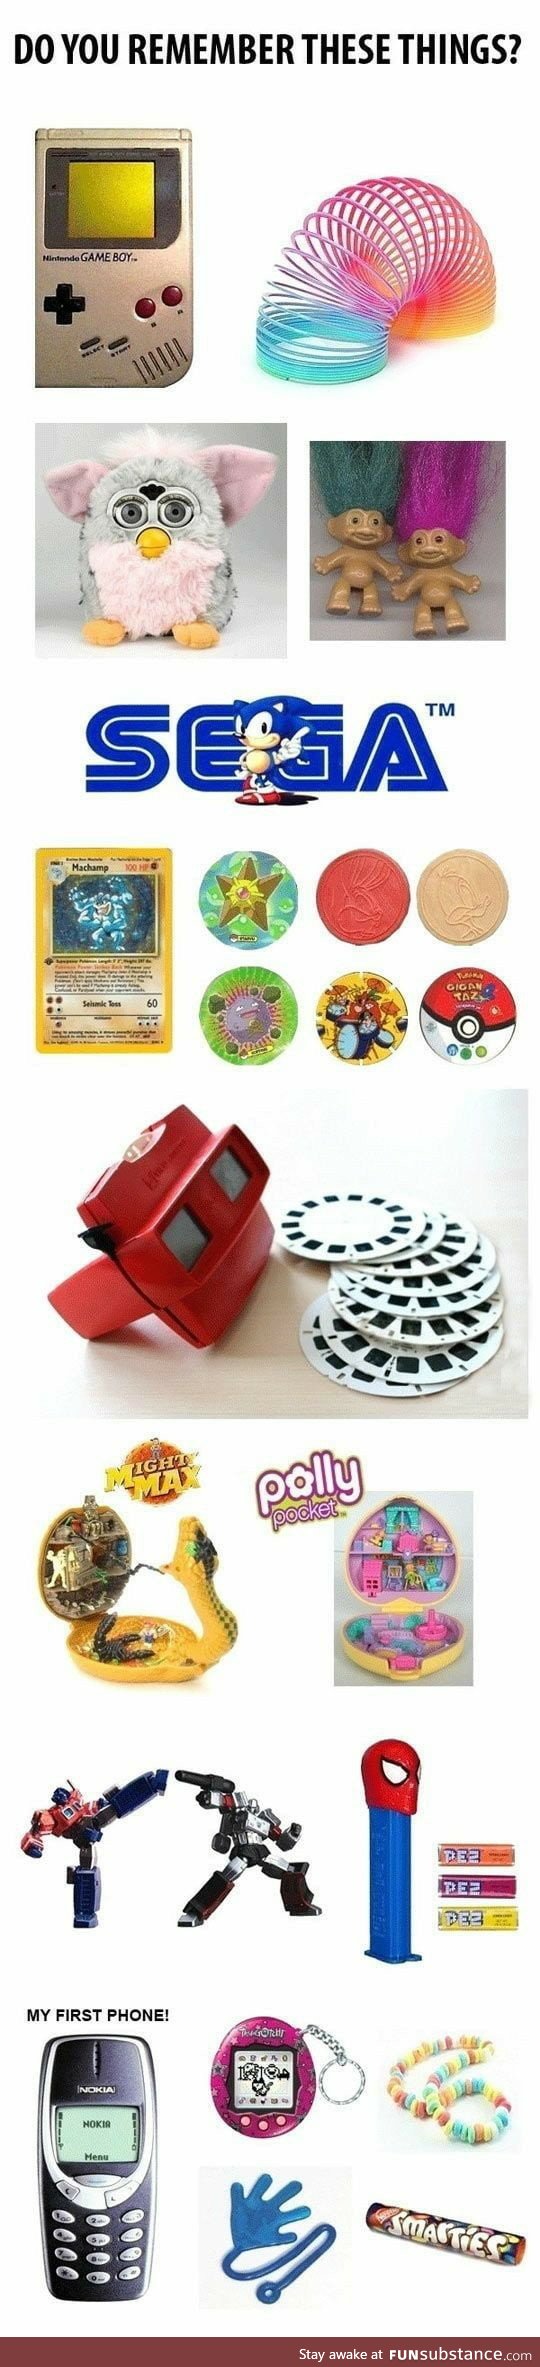 Our childhood was so cool